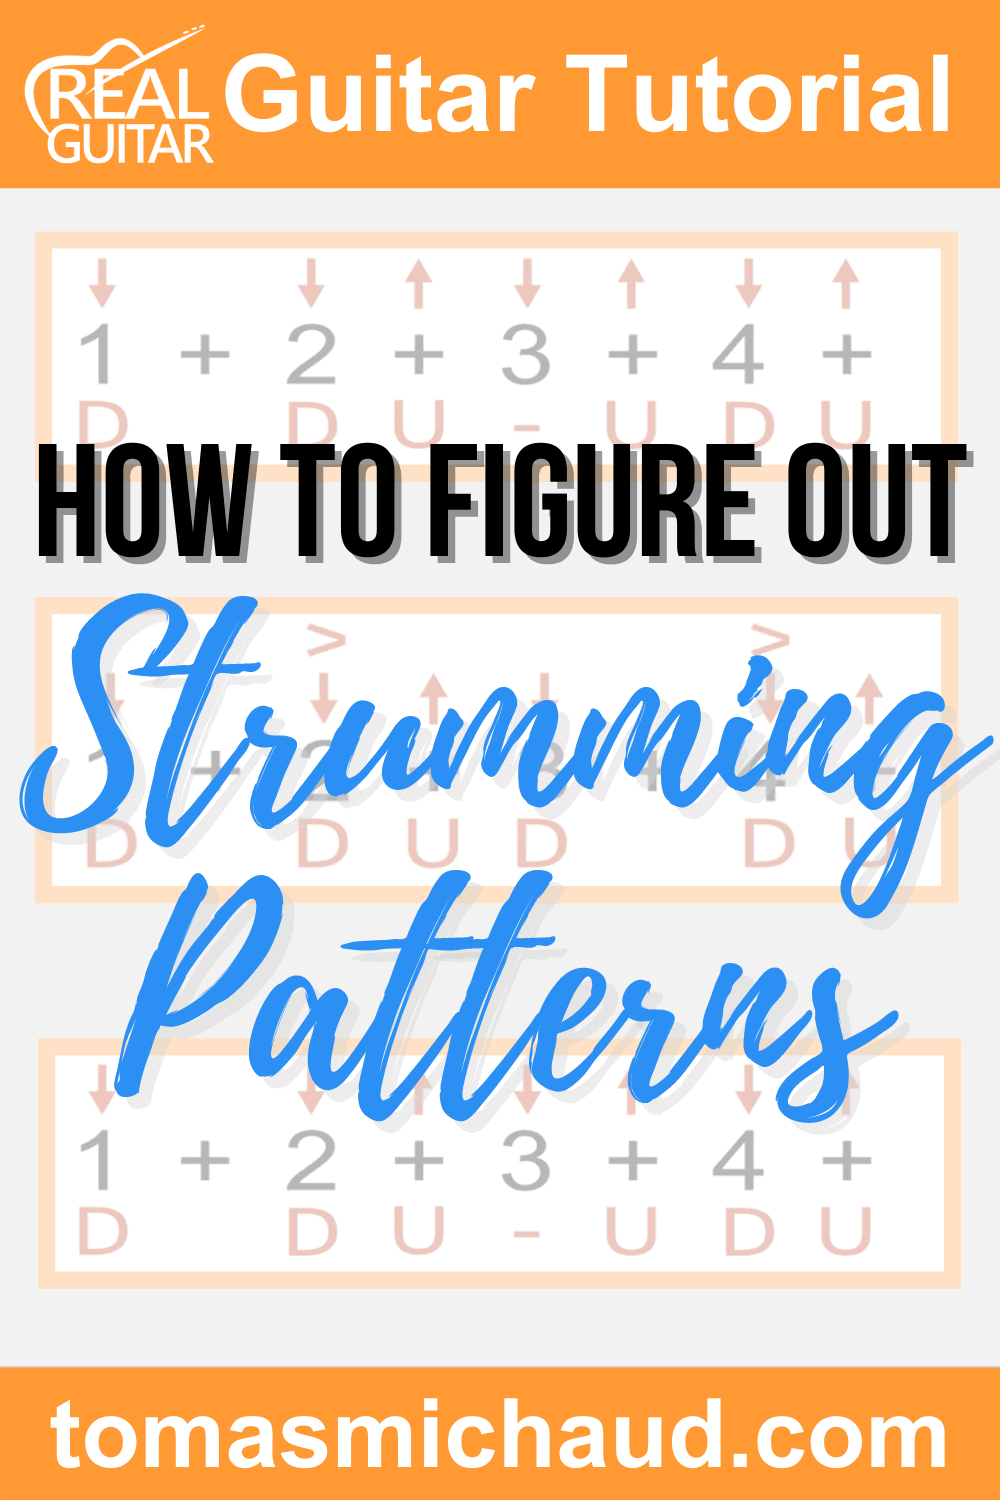 How To Figure Out Strumming Patterns